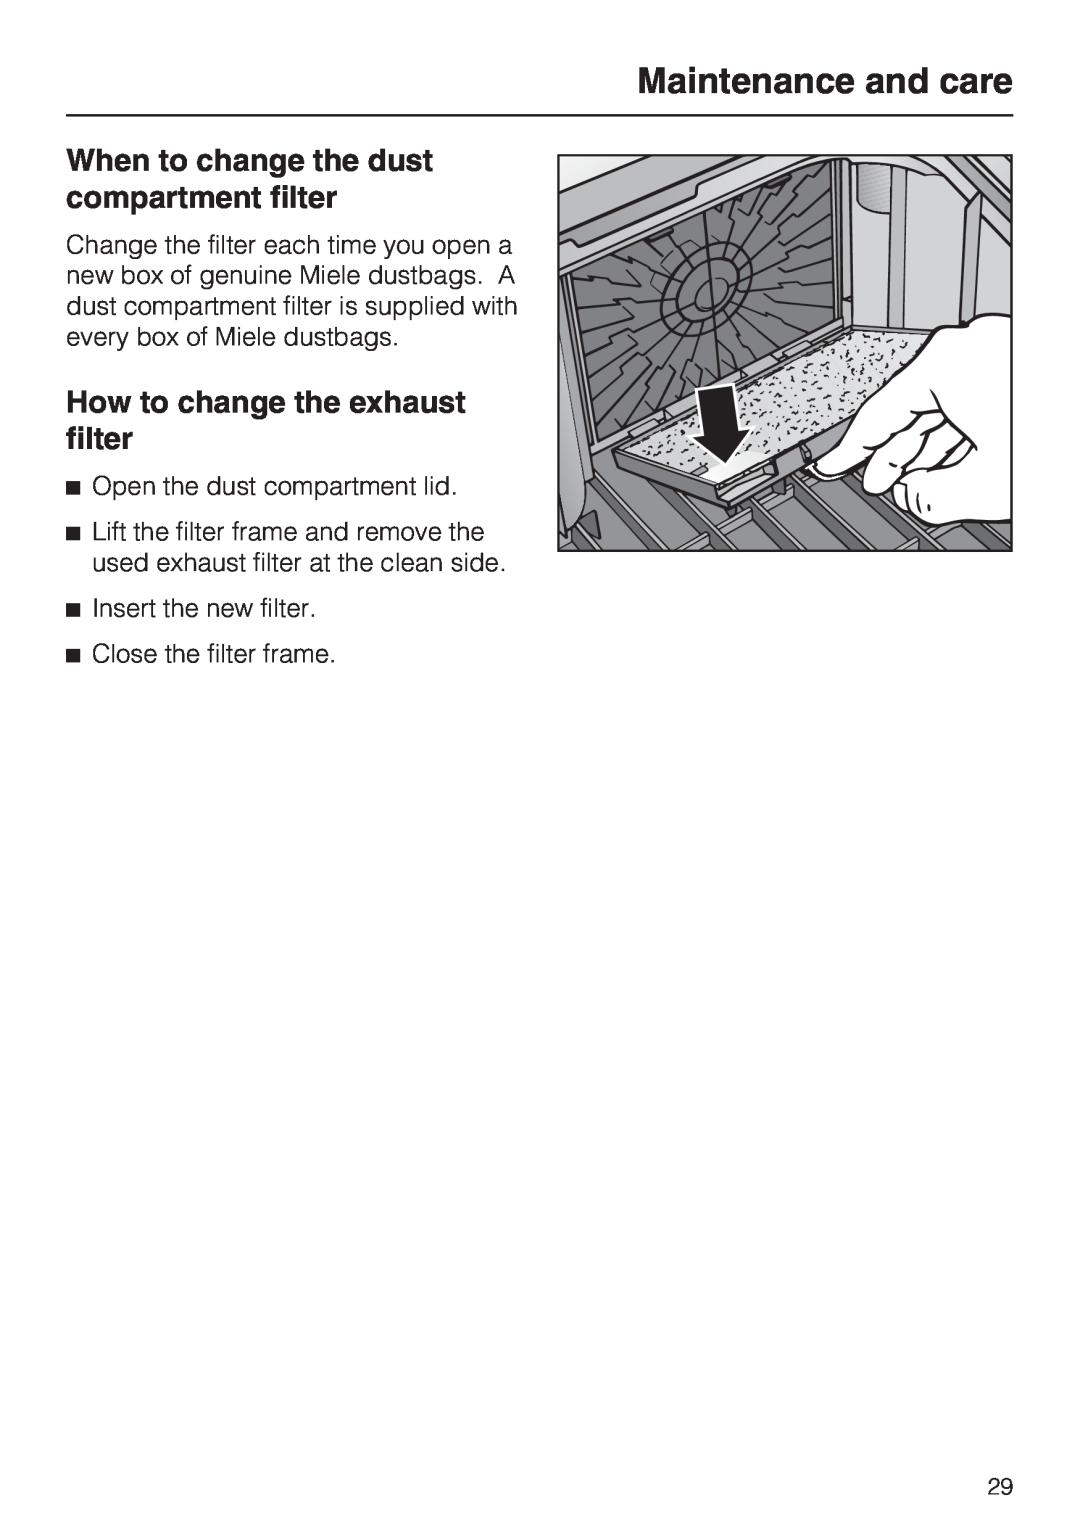 Miele S 5980 When to change the dust compartment filter, How to change the exhaust filter, Maintenance and care 